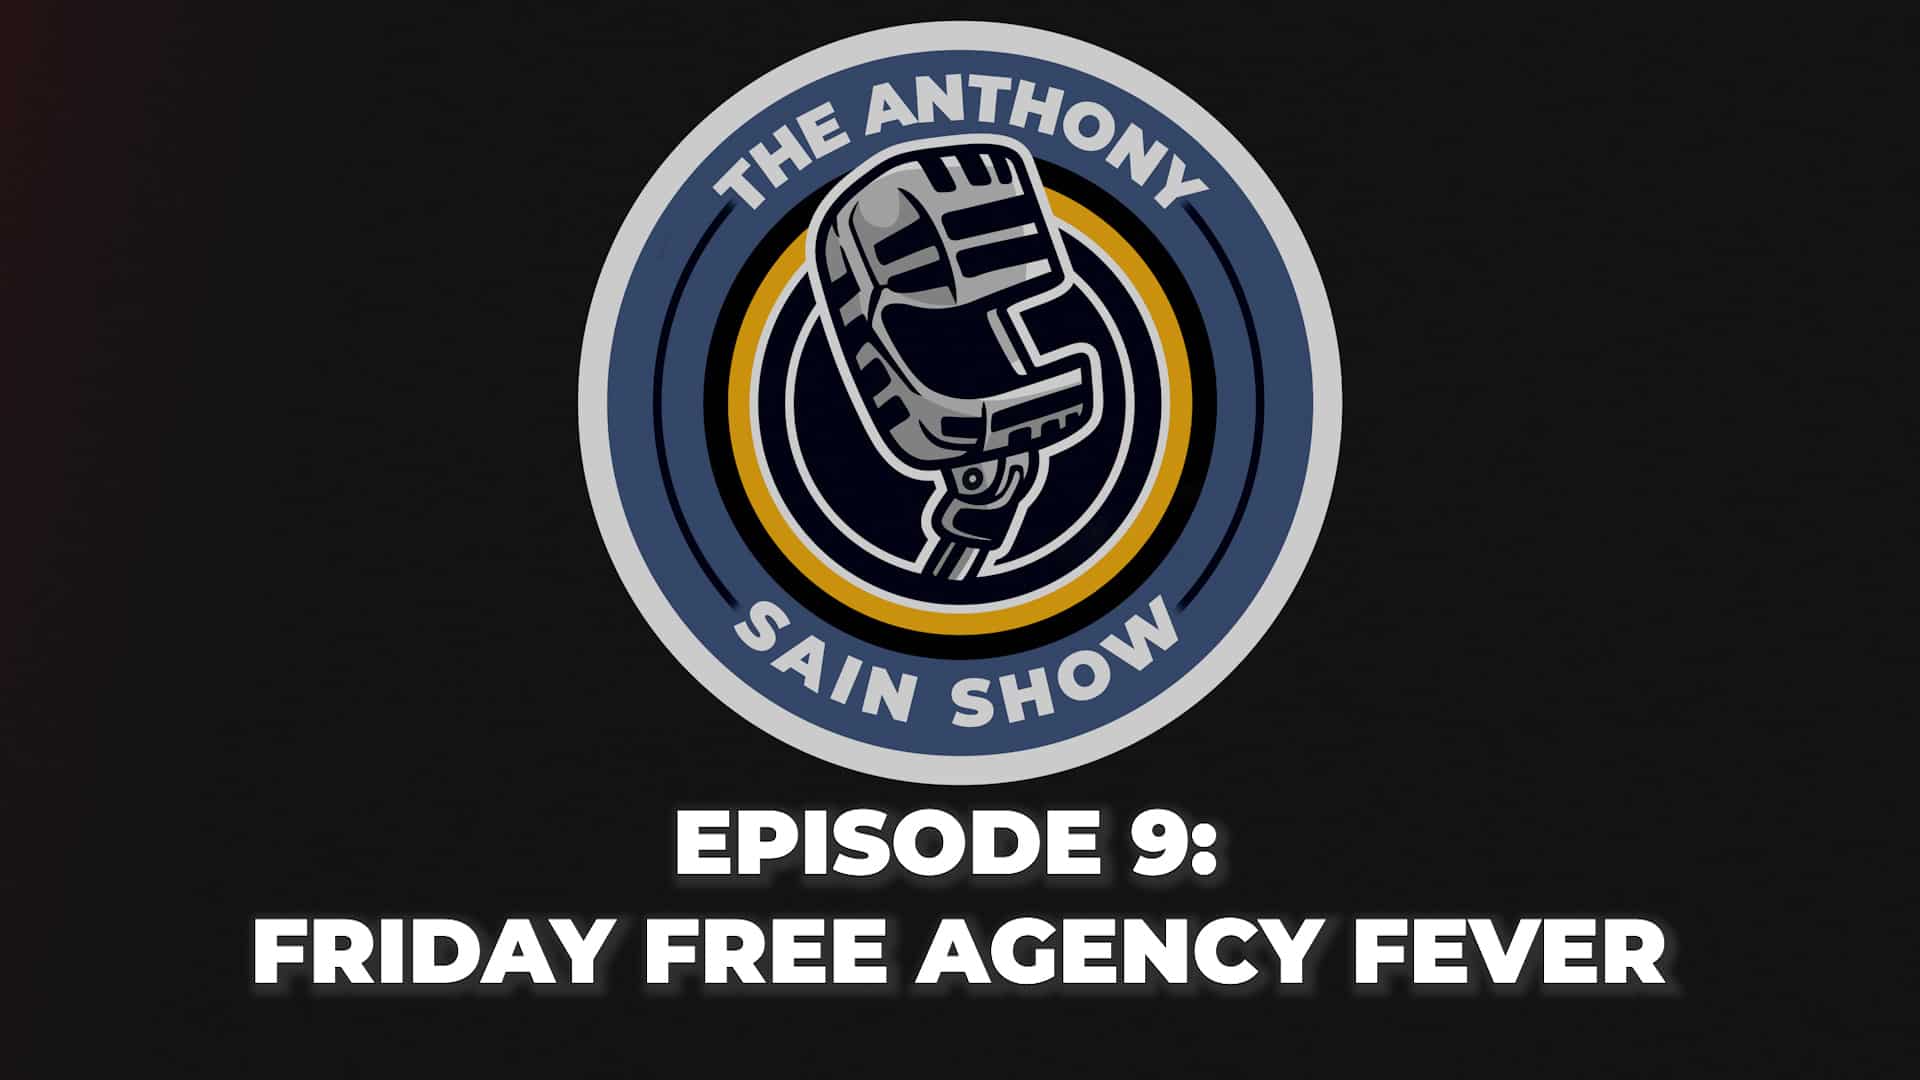 Featured image for “The Anthony Sain Show Ep 9: Friday Free Agency Fever”